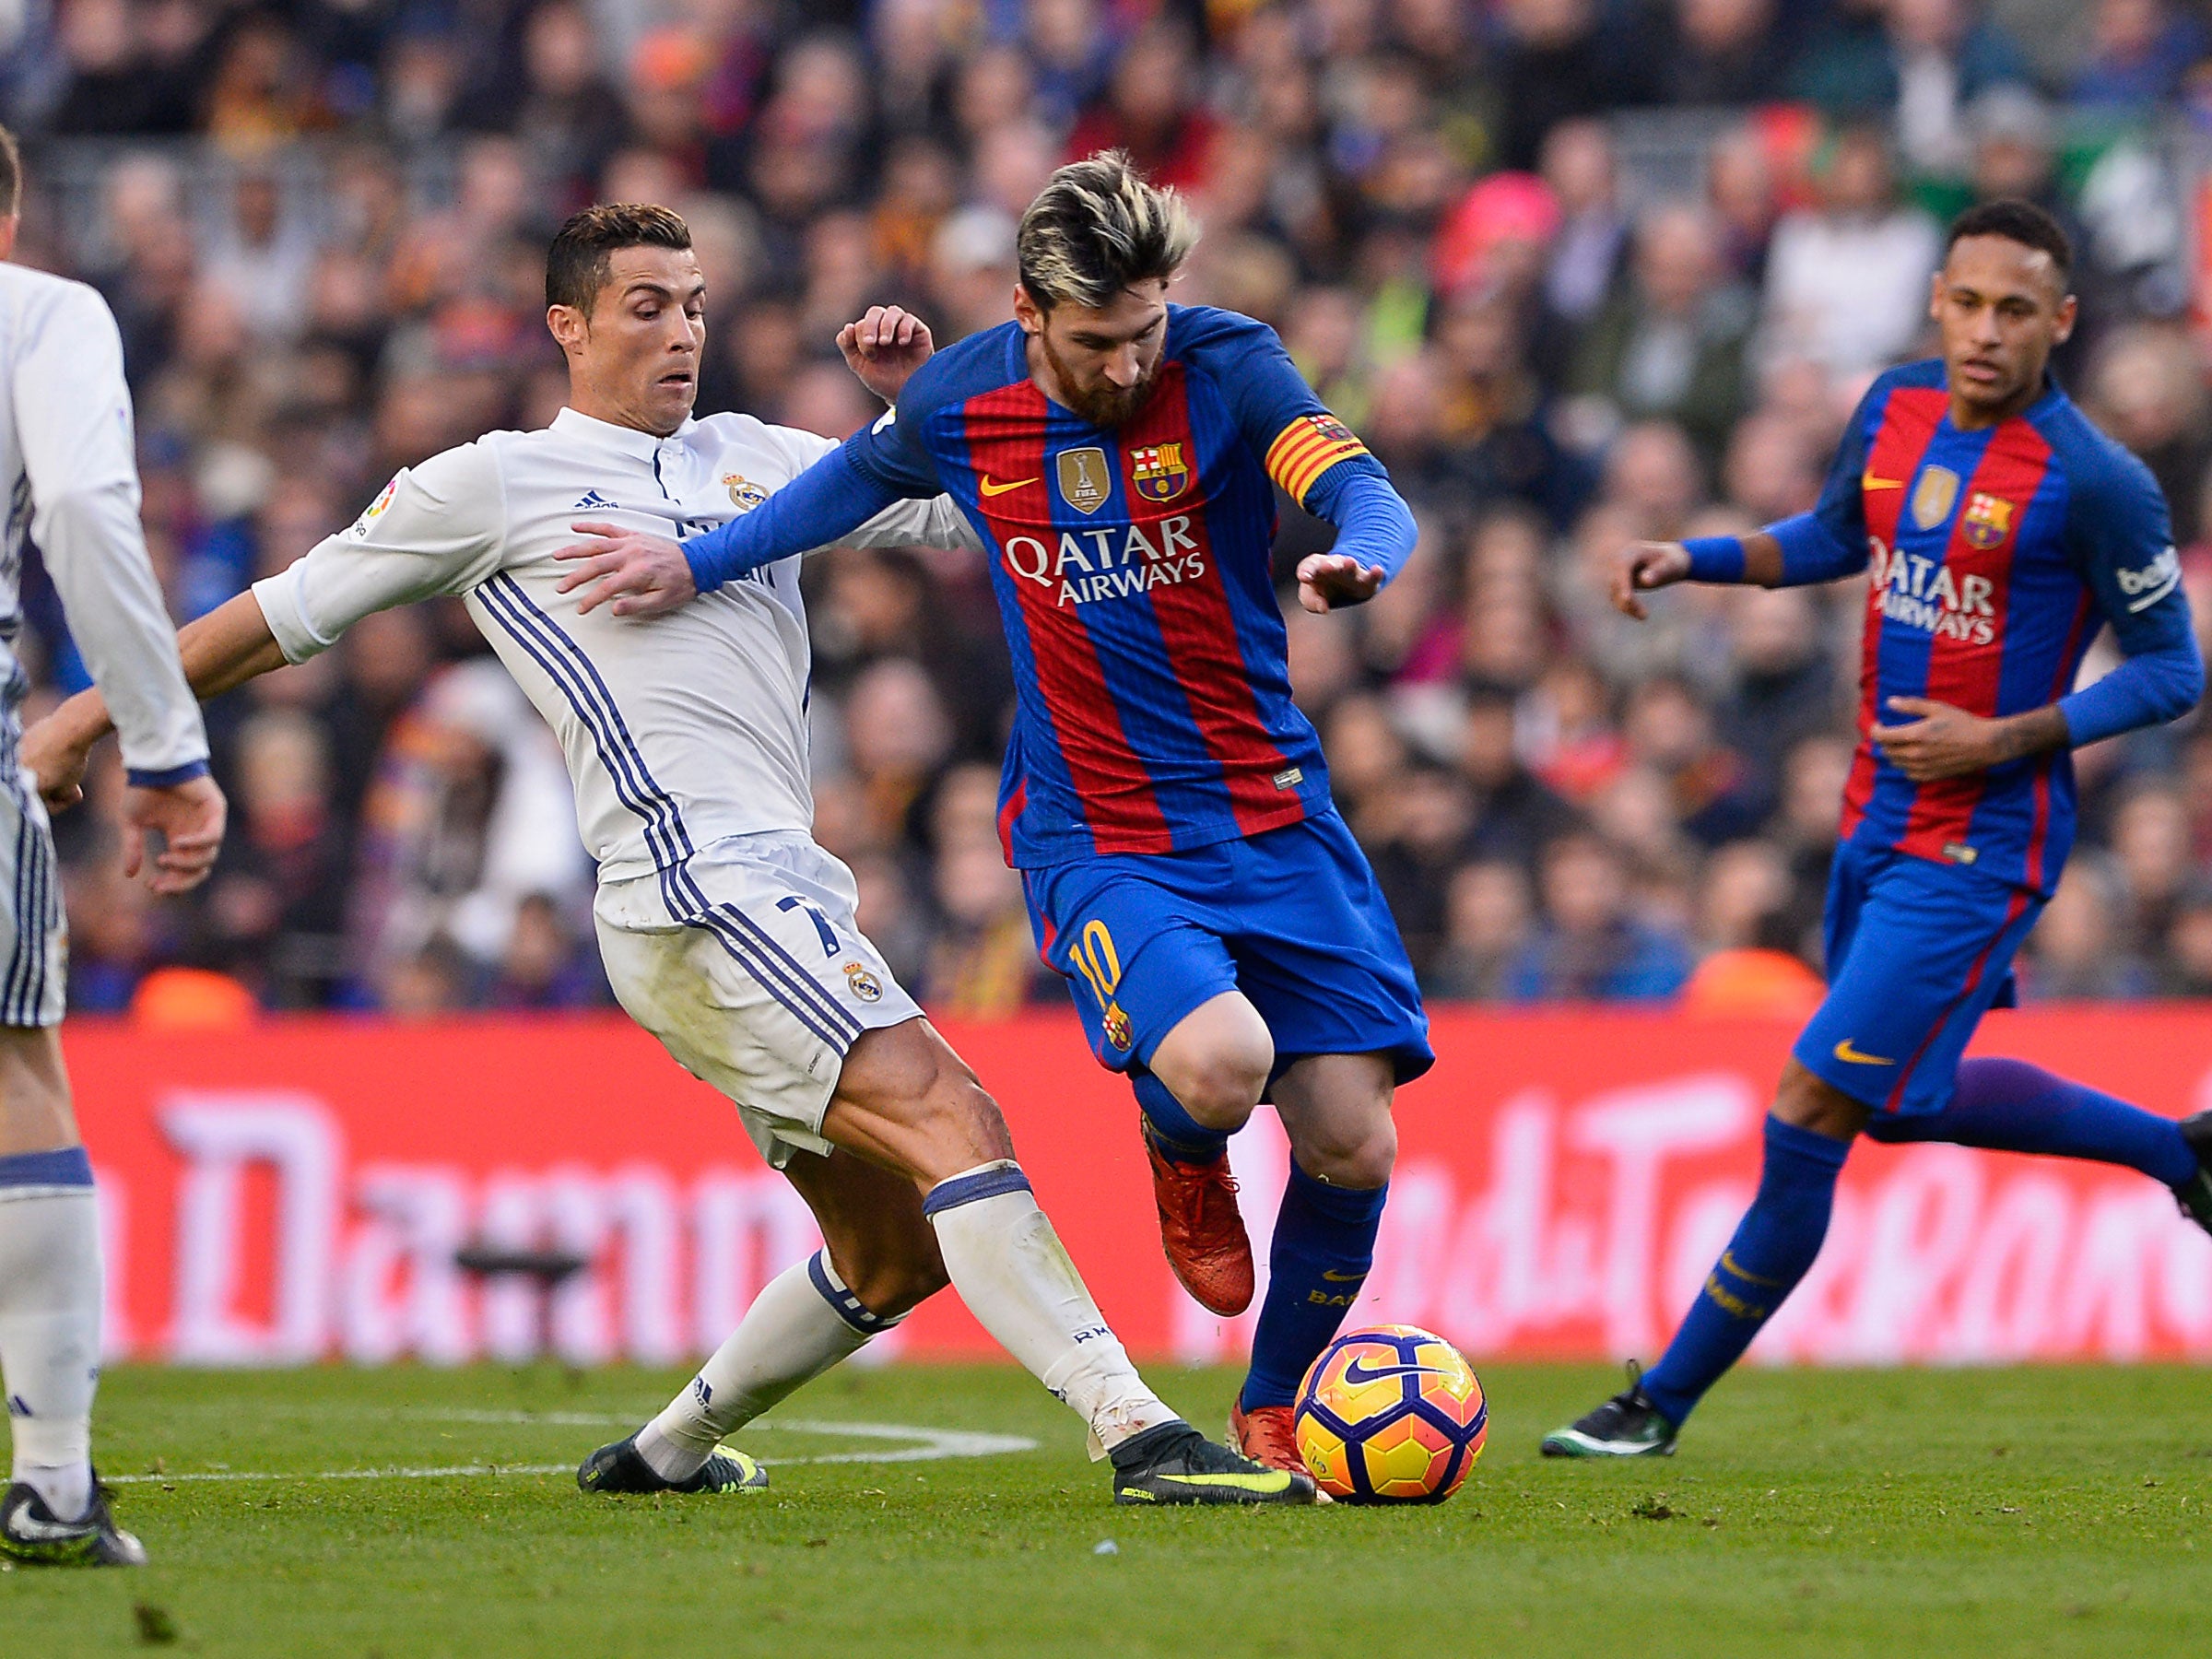 Such revelations are damaging for La Liga, a competition that boasts stars like Cristiano Ronaldo and Lionel Messi